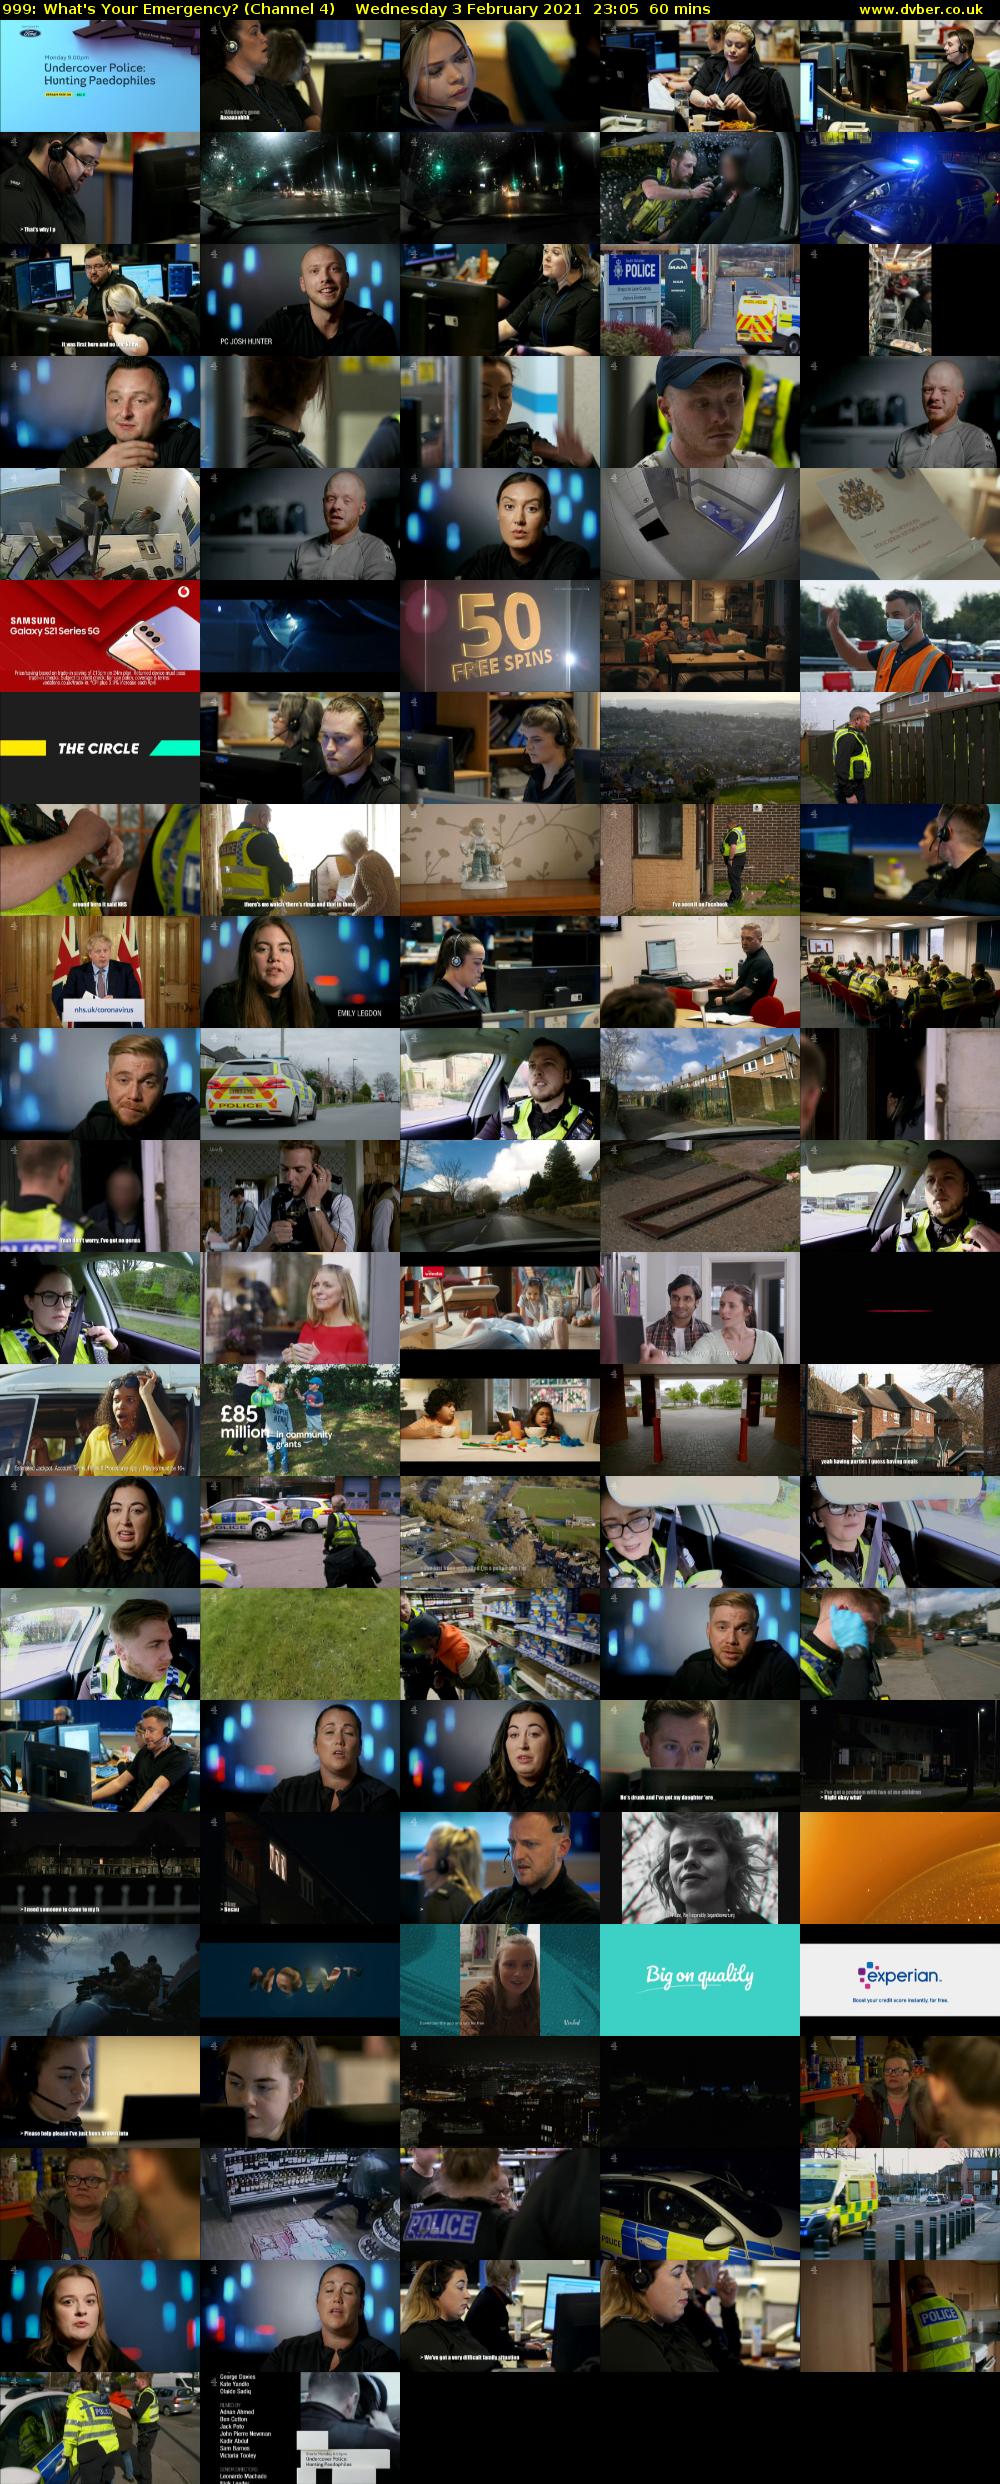 999: What's Your Emergency? (Channel 4) Wednesday 3 February 2021 23:05 - 00:05